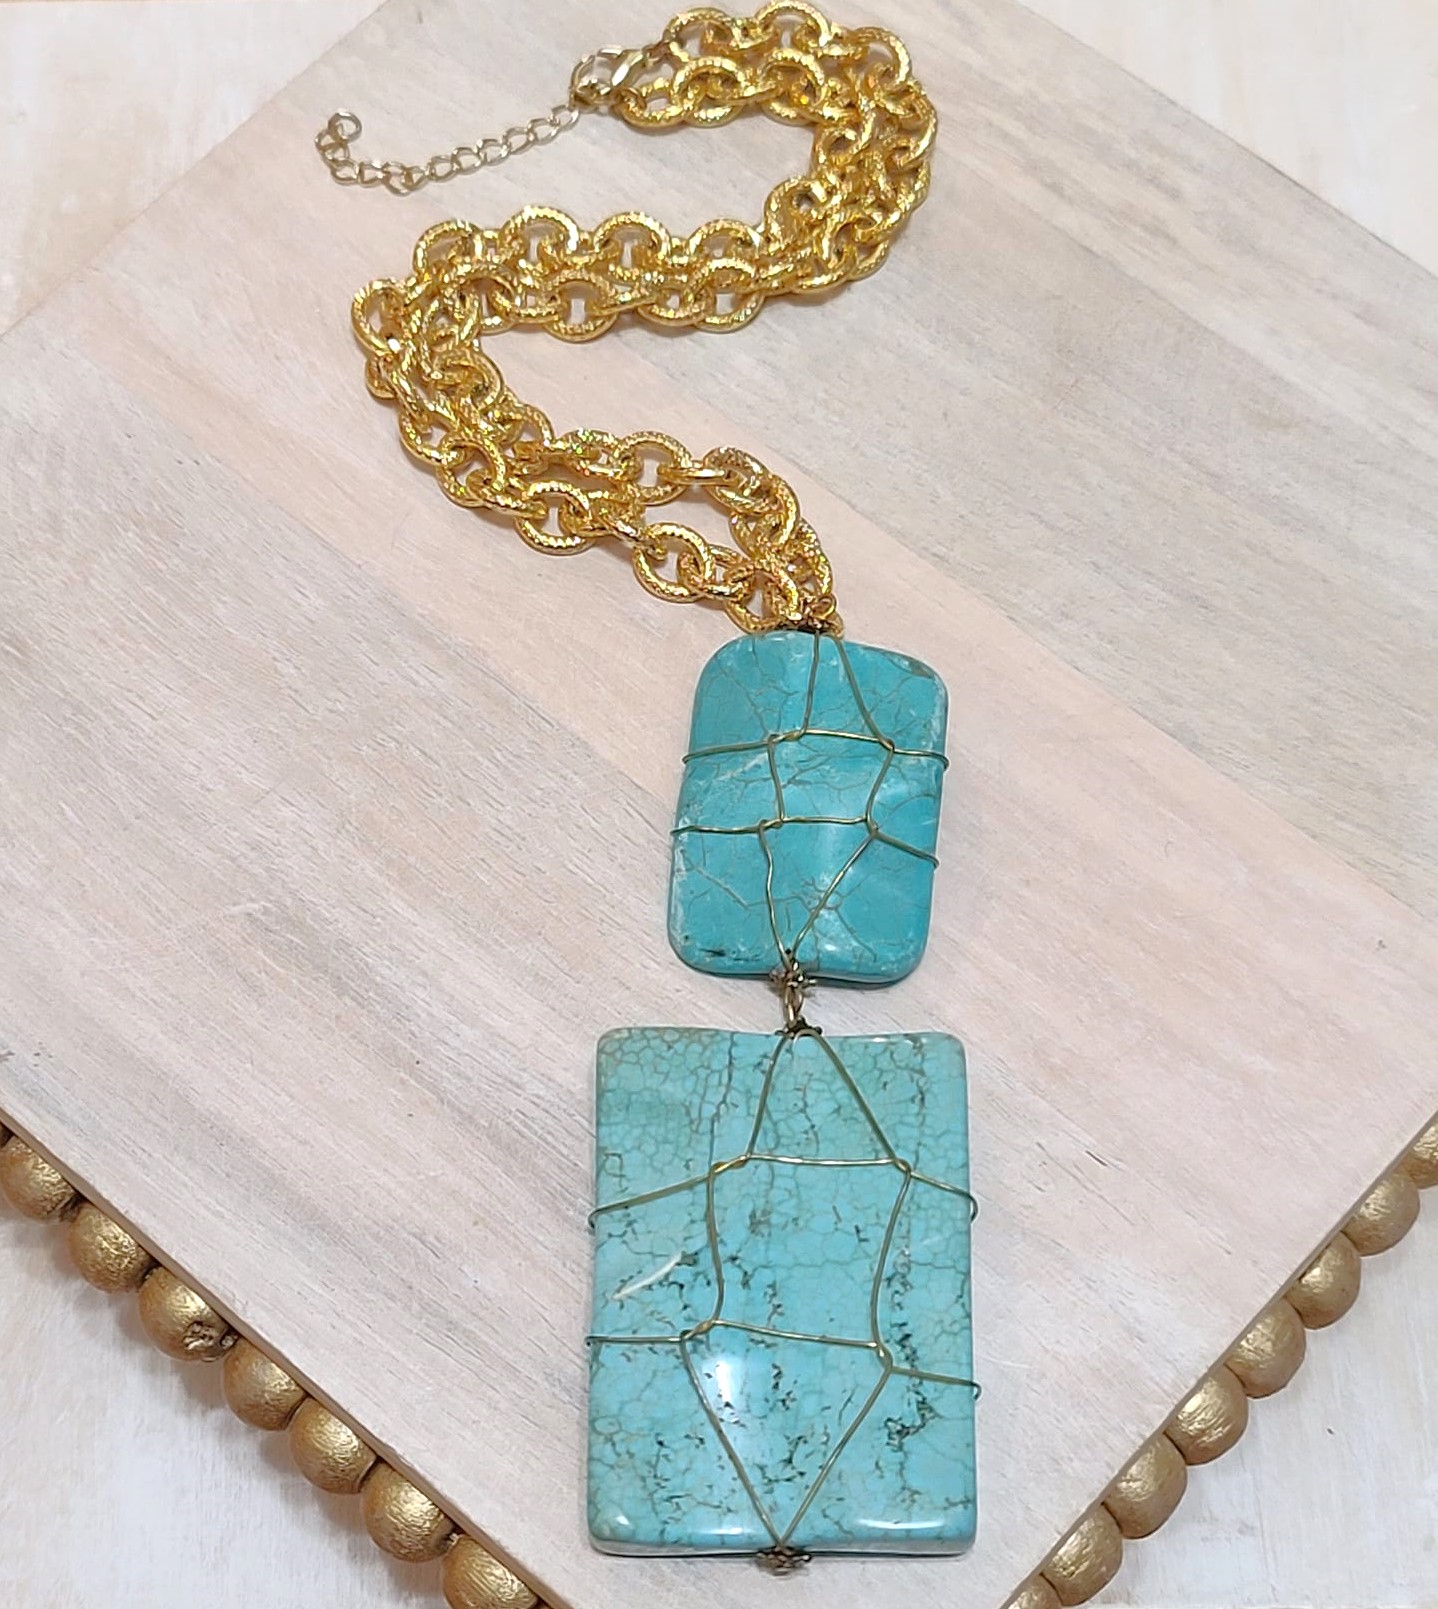 Turquoise Howilite pendant necklace, chunky retro look, large caged howlite stone